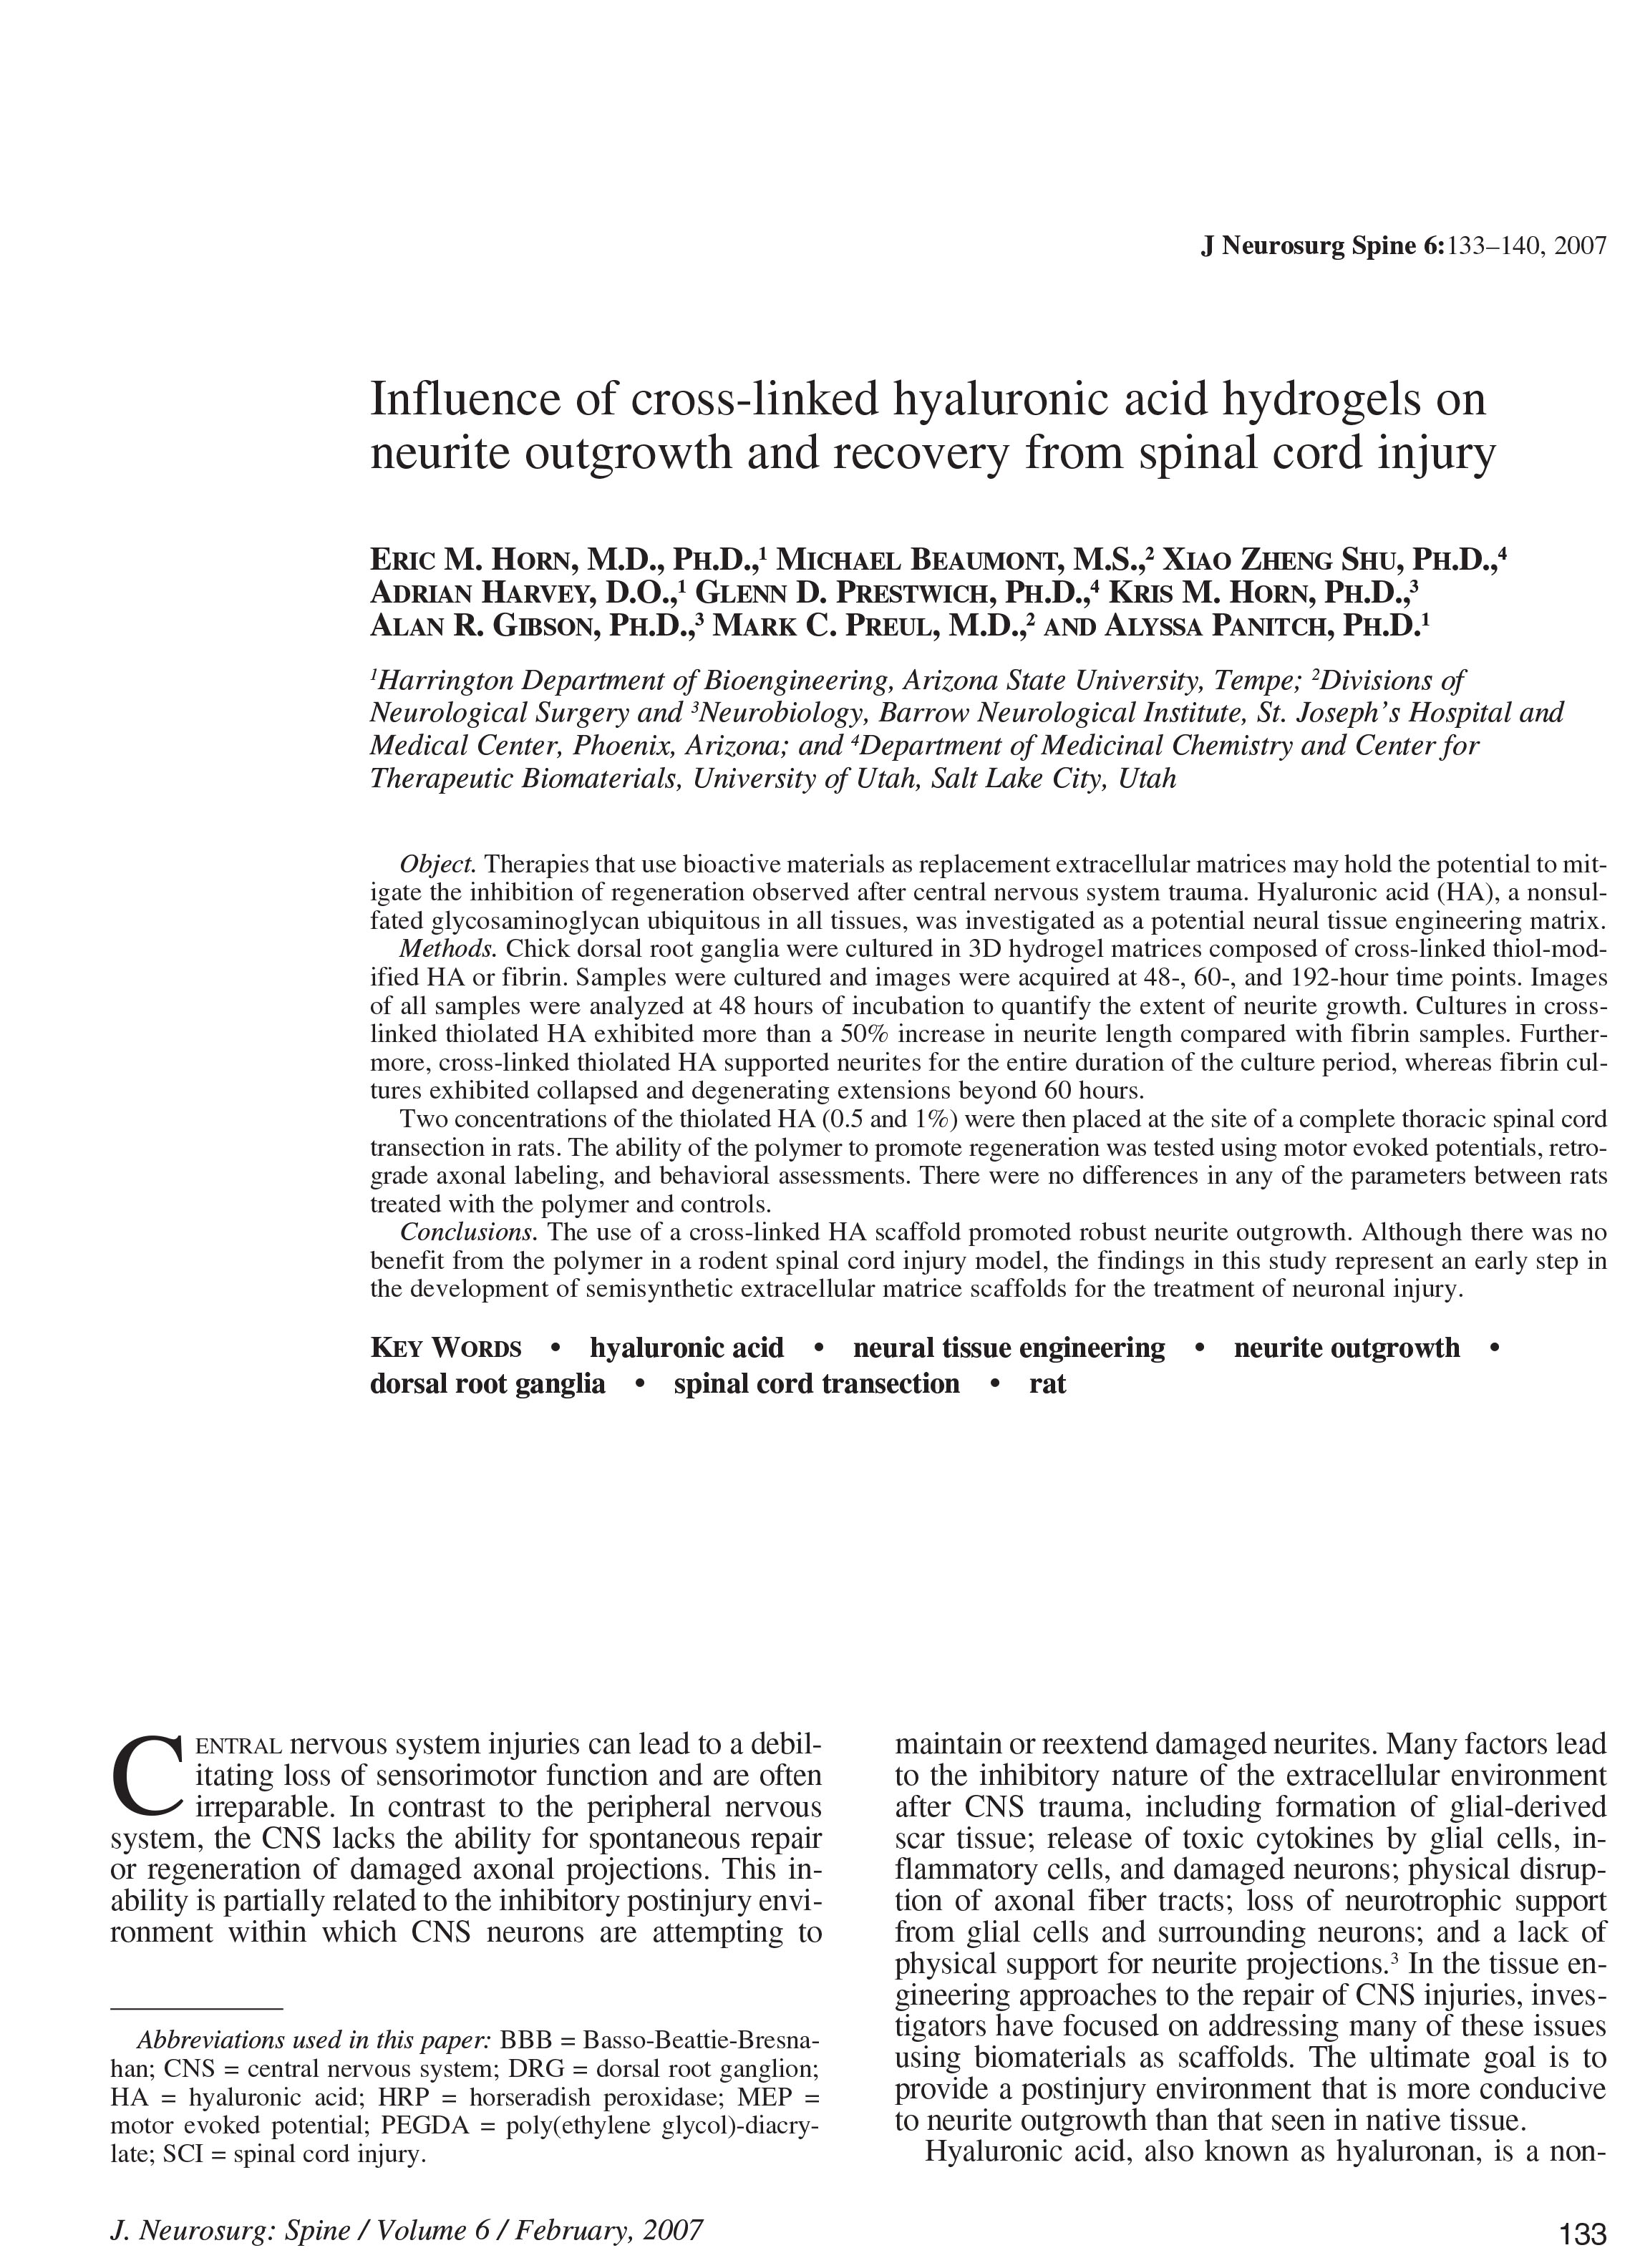 Influence_of_cross_linked_hyaluronic_acid_hydrogels_on_neurite_outgrowth-2.jpg